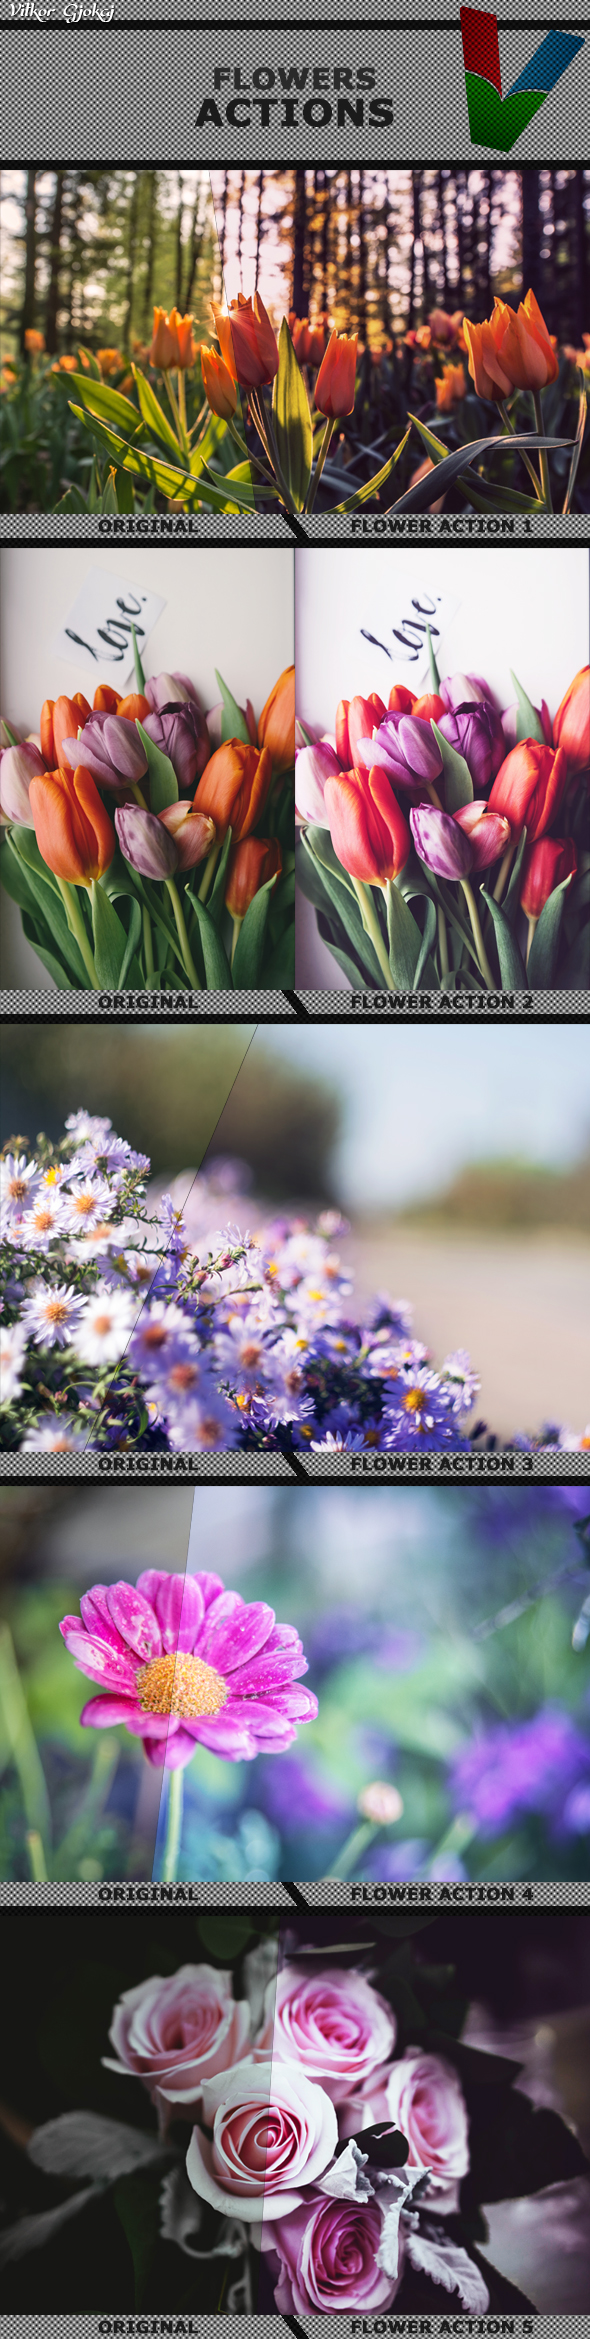 Flower Actions 1